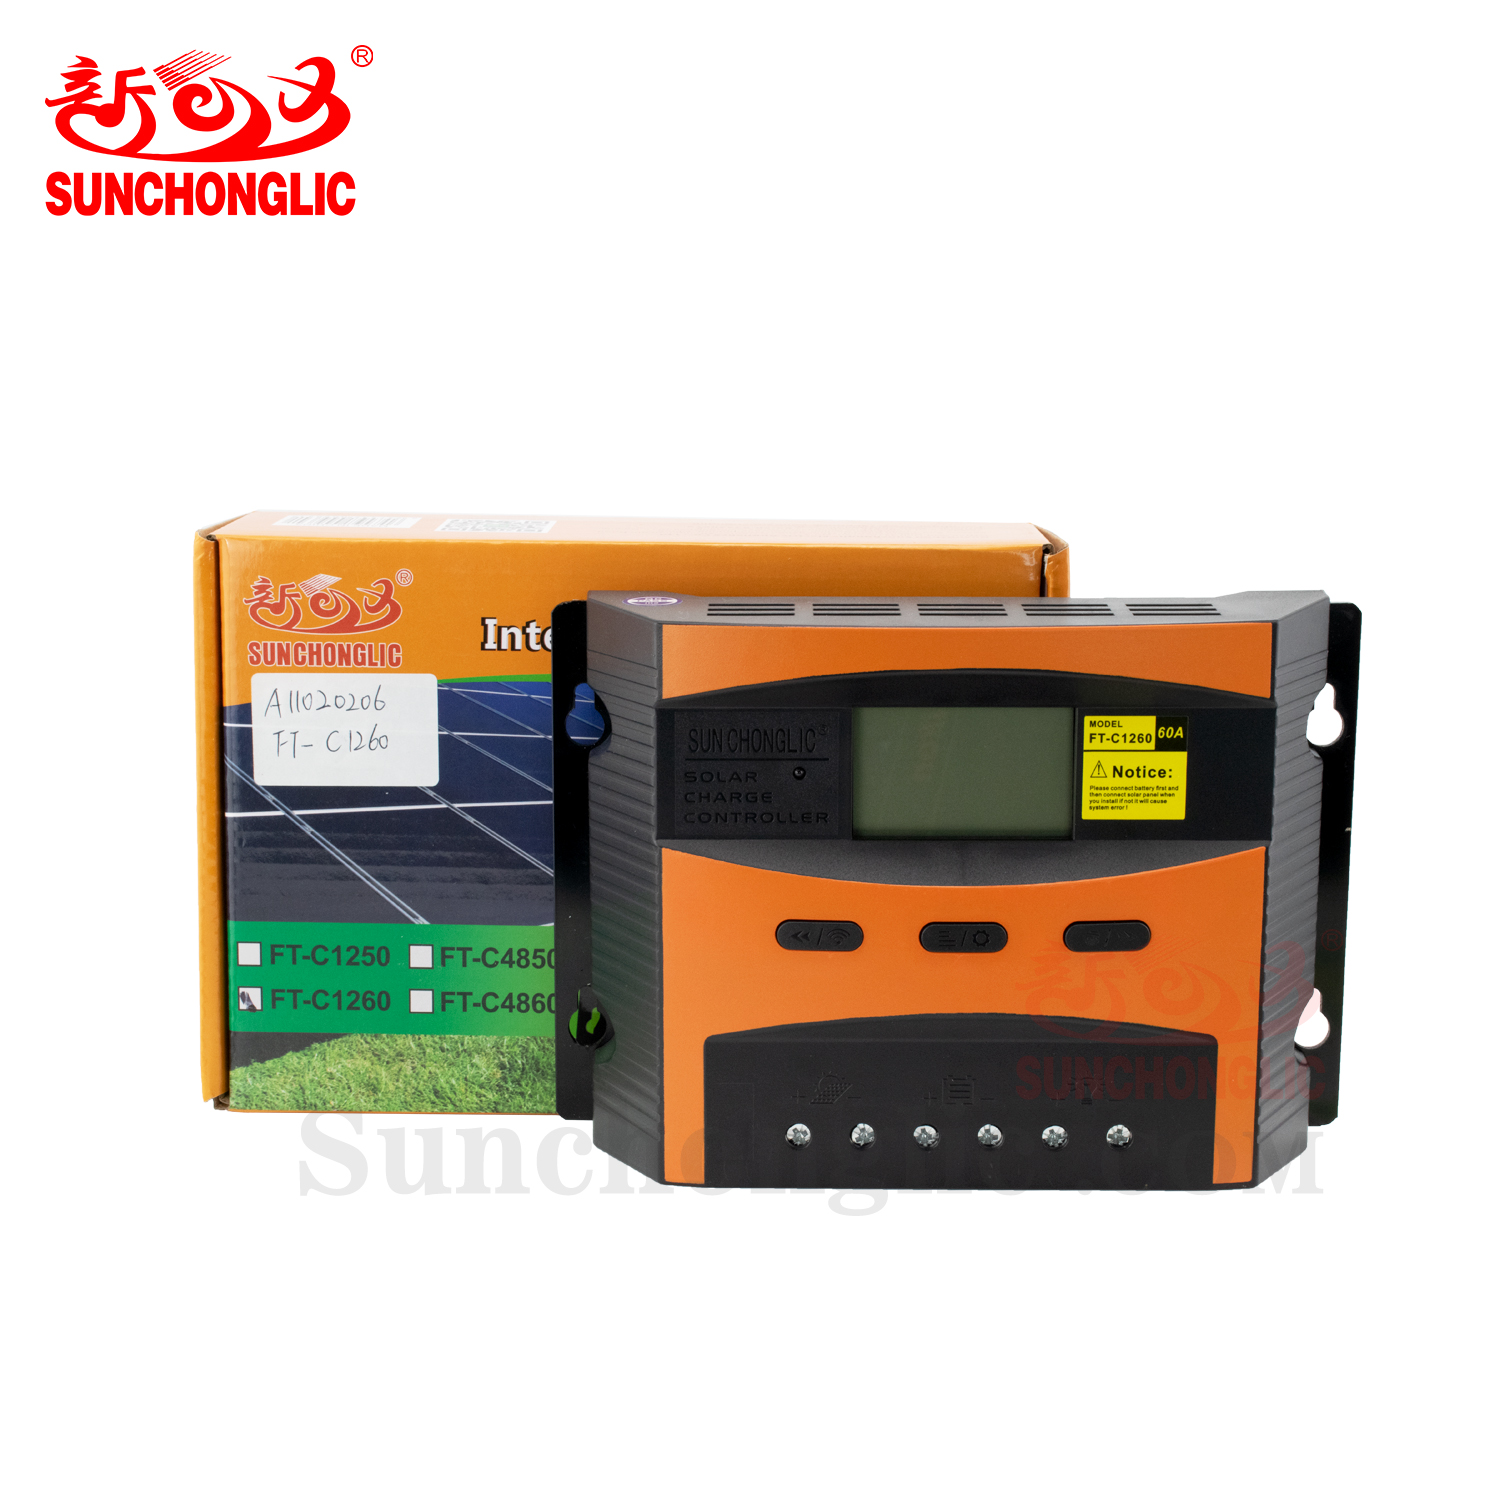 Solar Charge Controller - FT-C1260